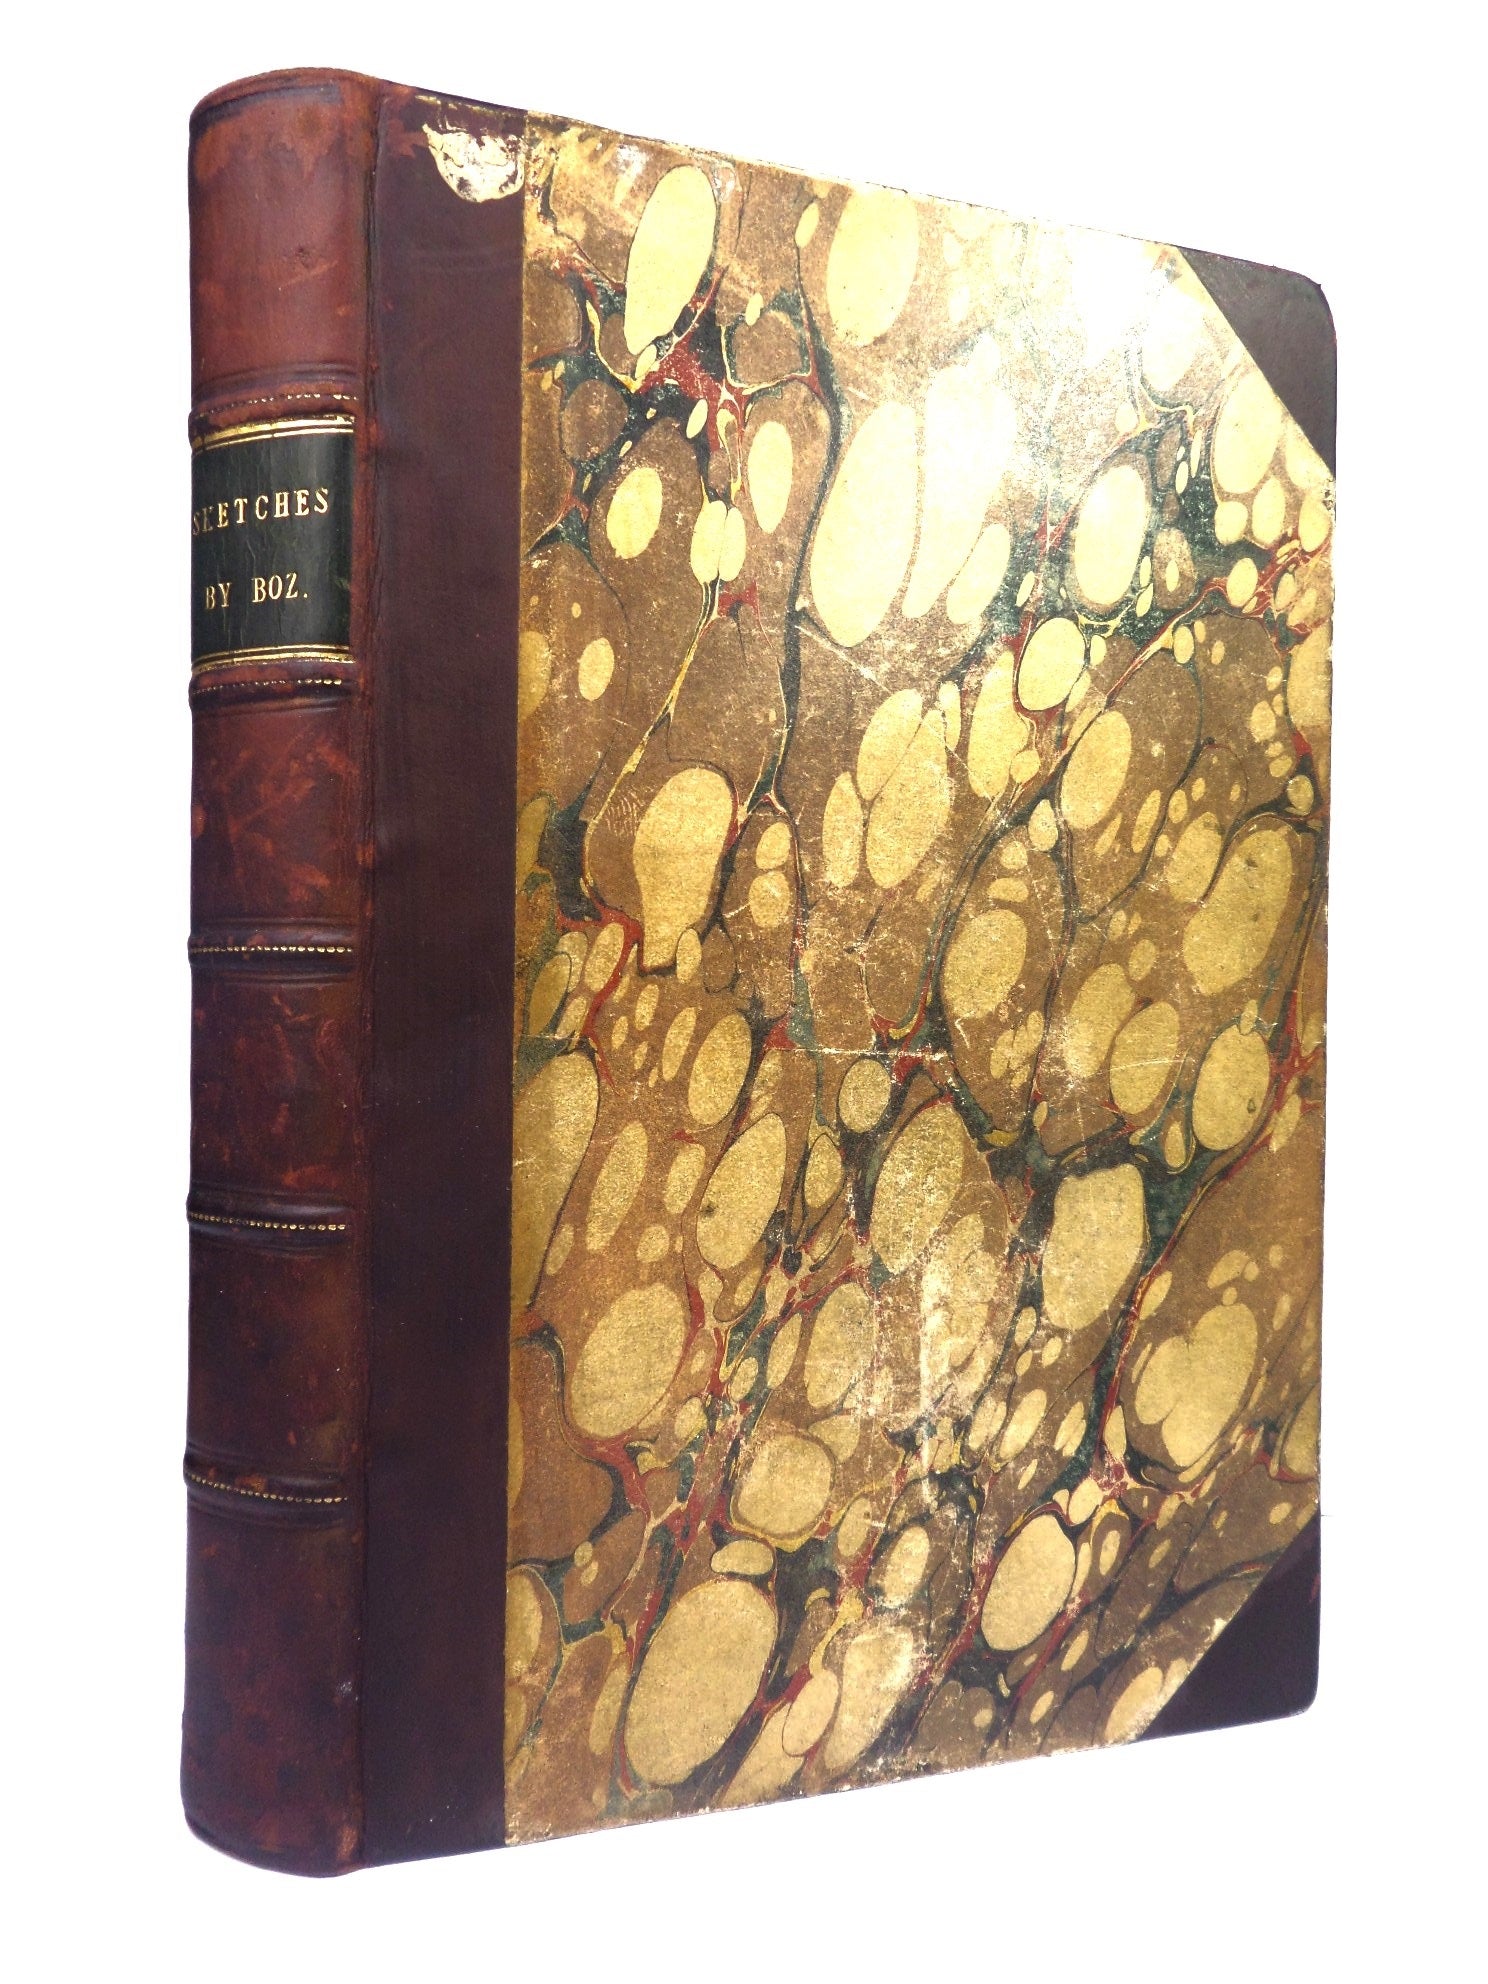 SKETCHES BY BOZ BY CHARLES DICKENS 1850 LEATHER BINDING